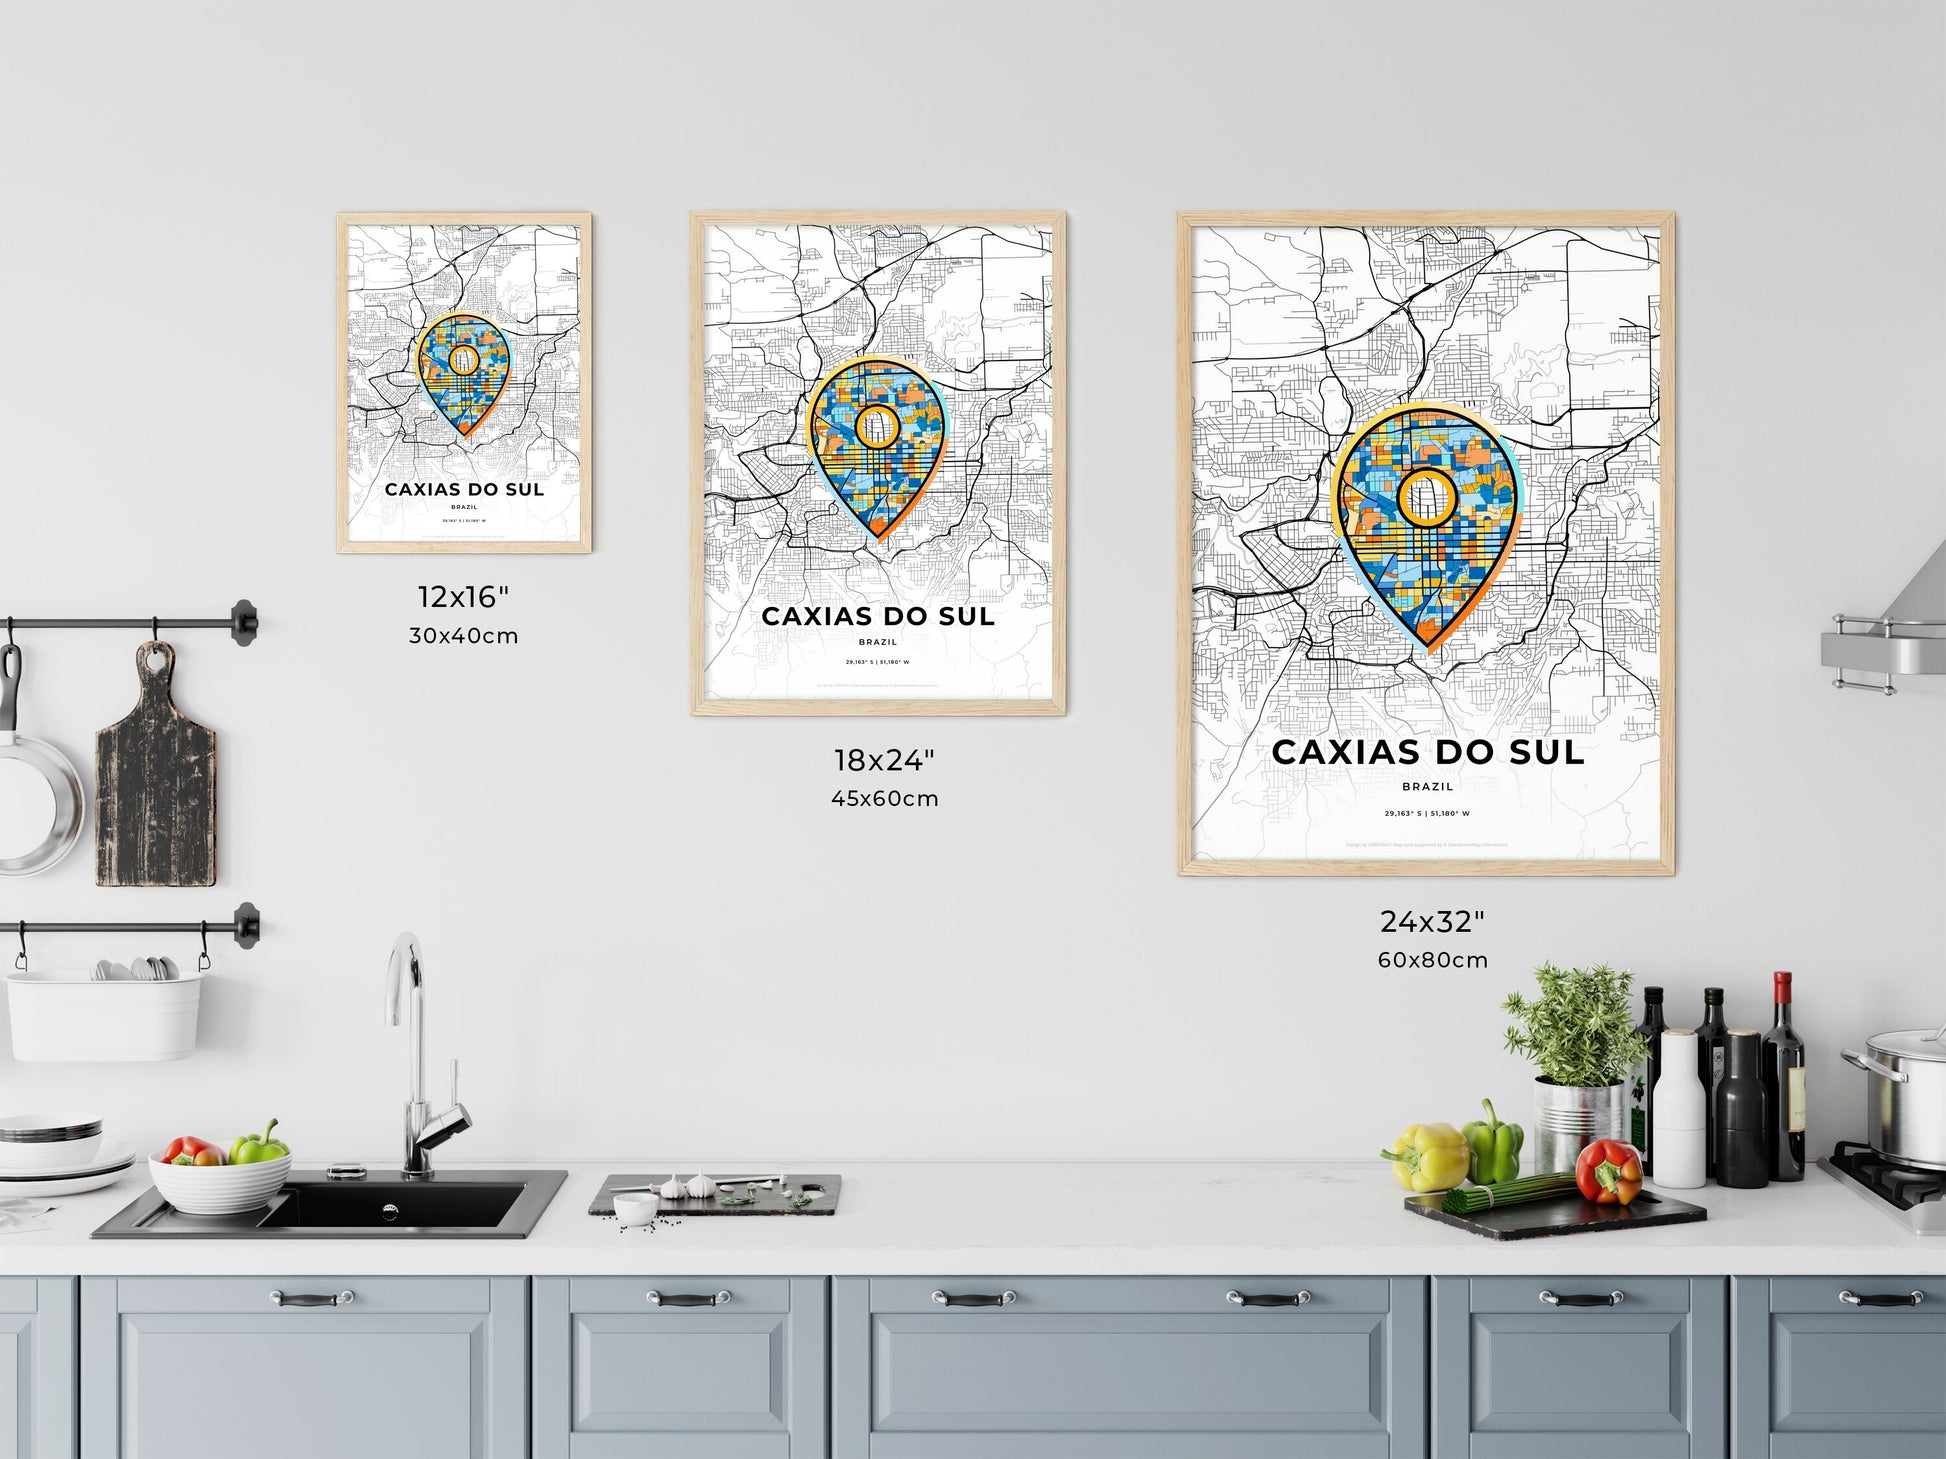 CAXIAS DO SUL BRAZIL minimal art map with a colorful icon. Where it all began, Couple map gift.